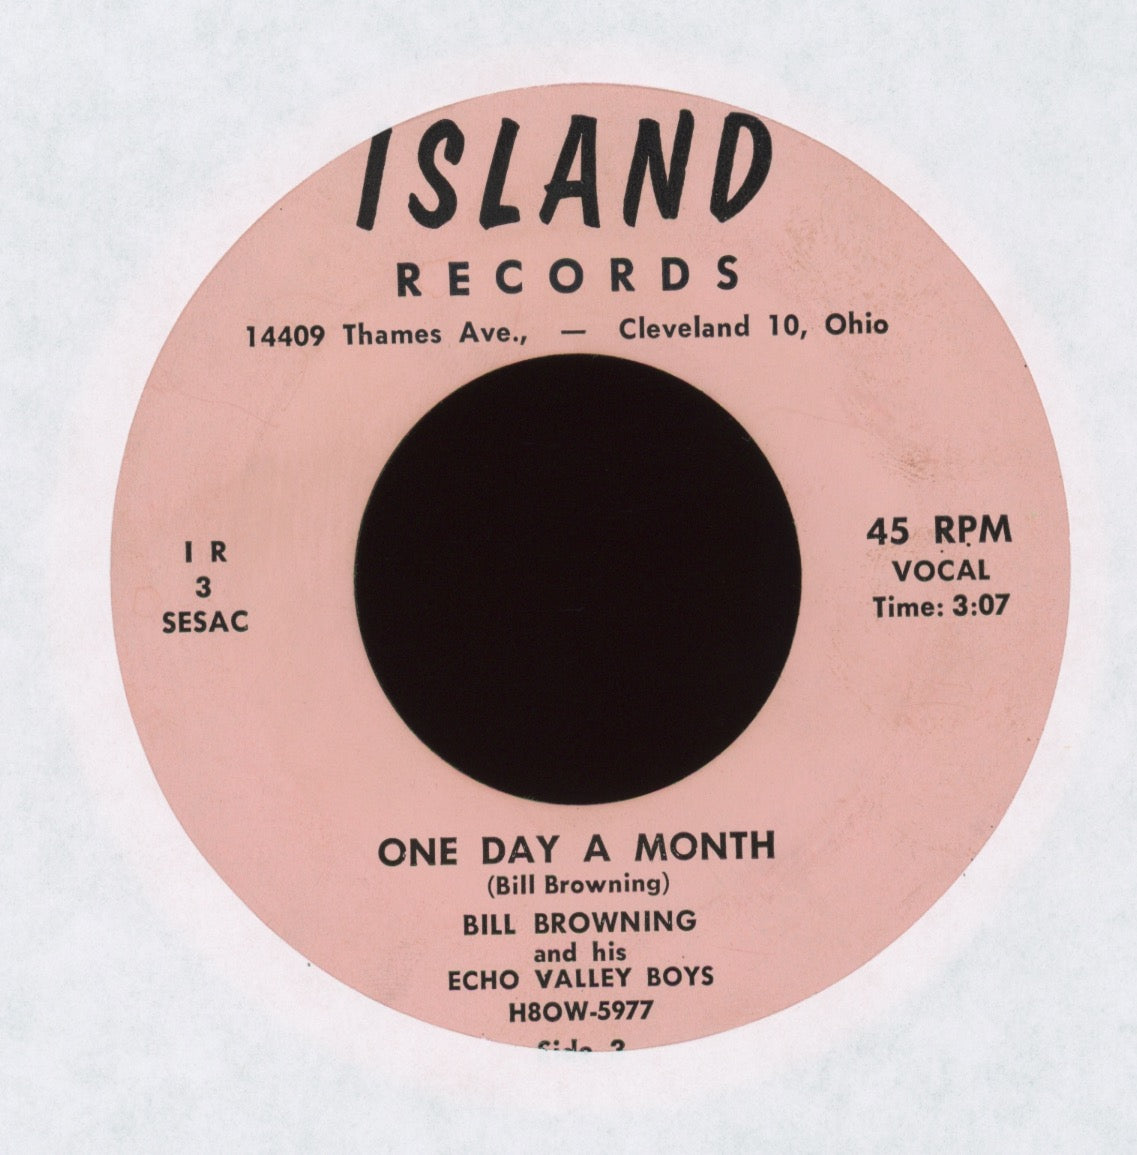 Bill Browning - Don't Wait Too Late on Island